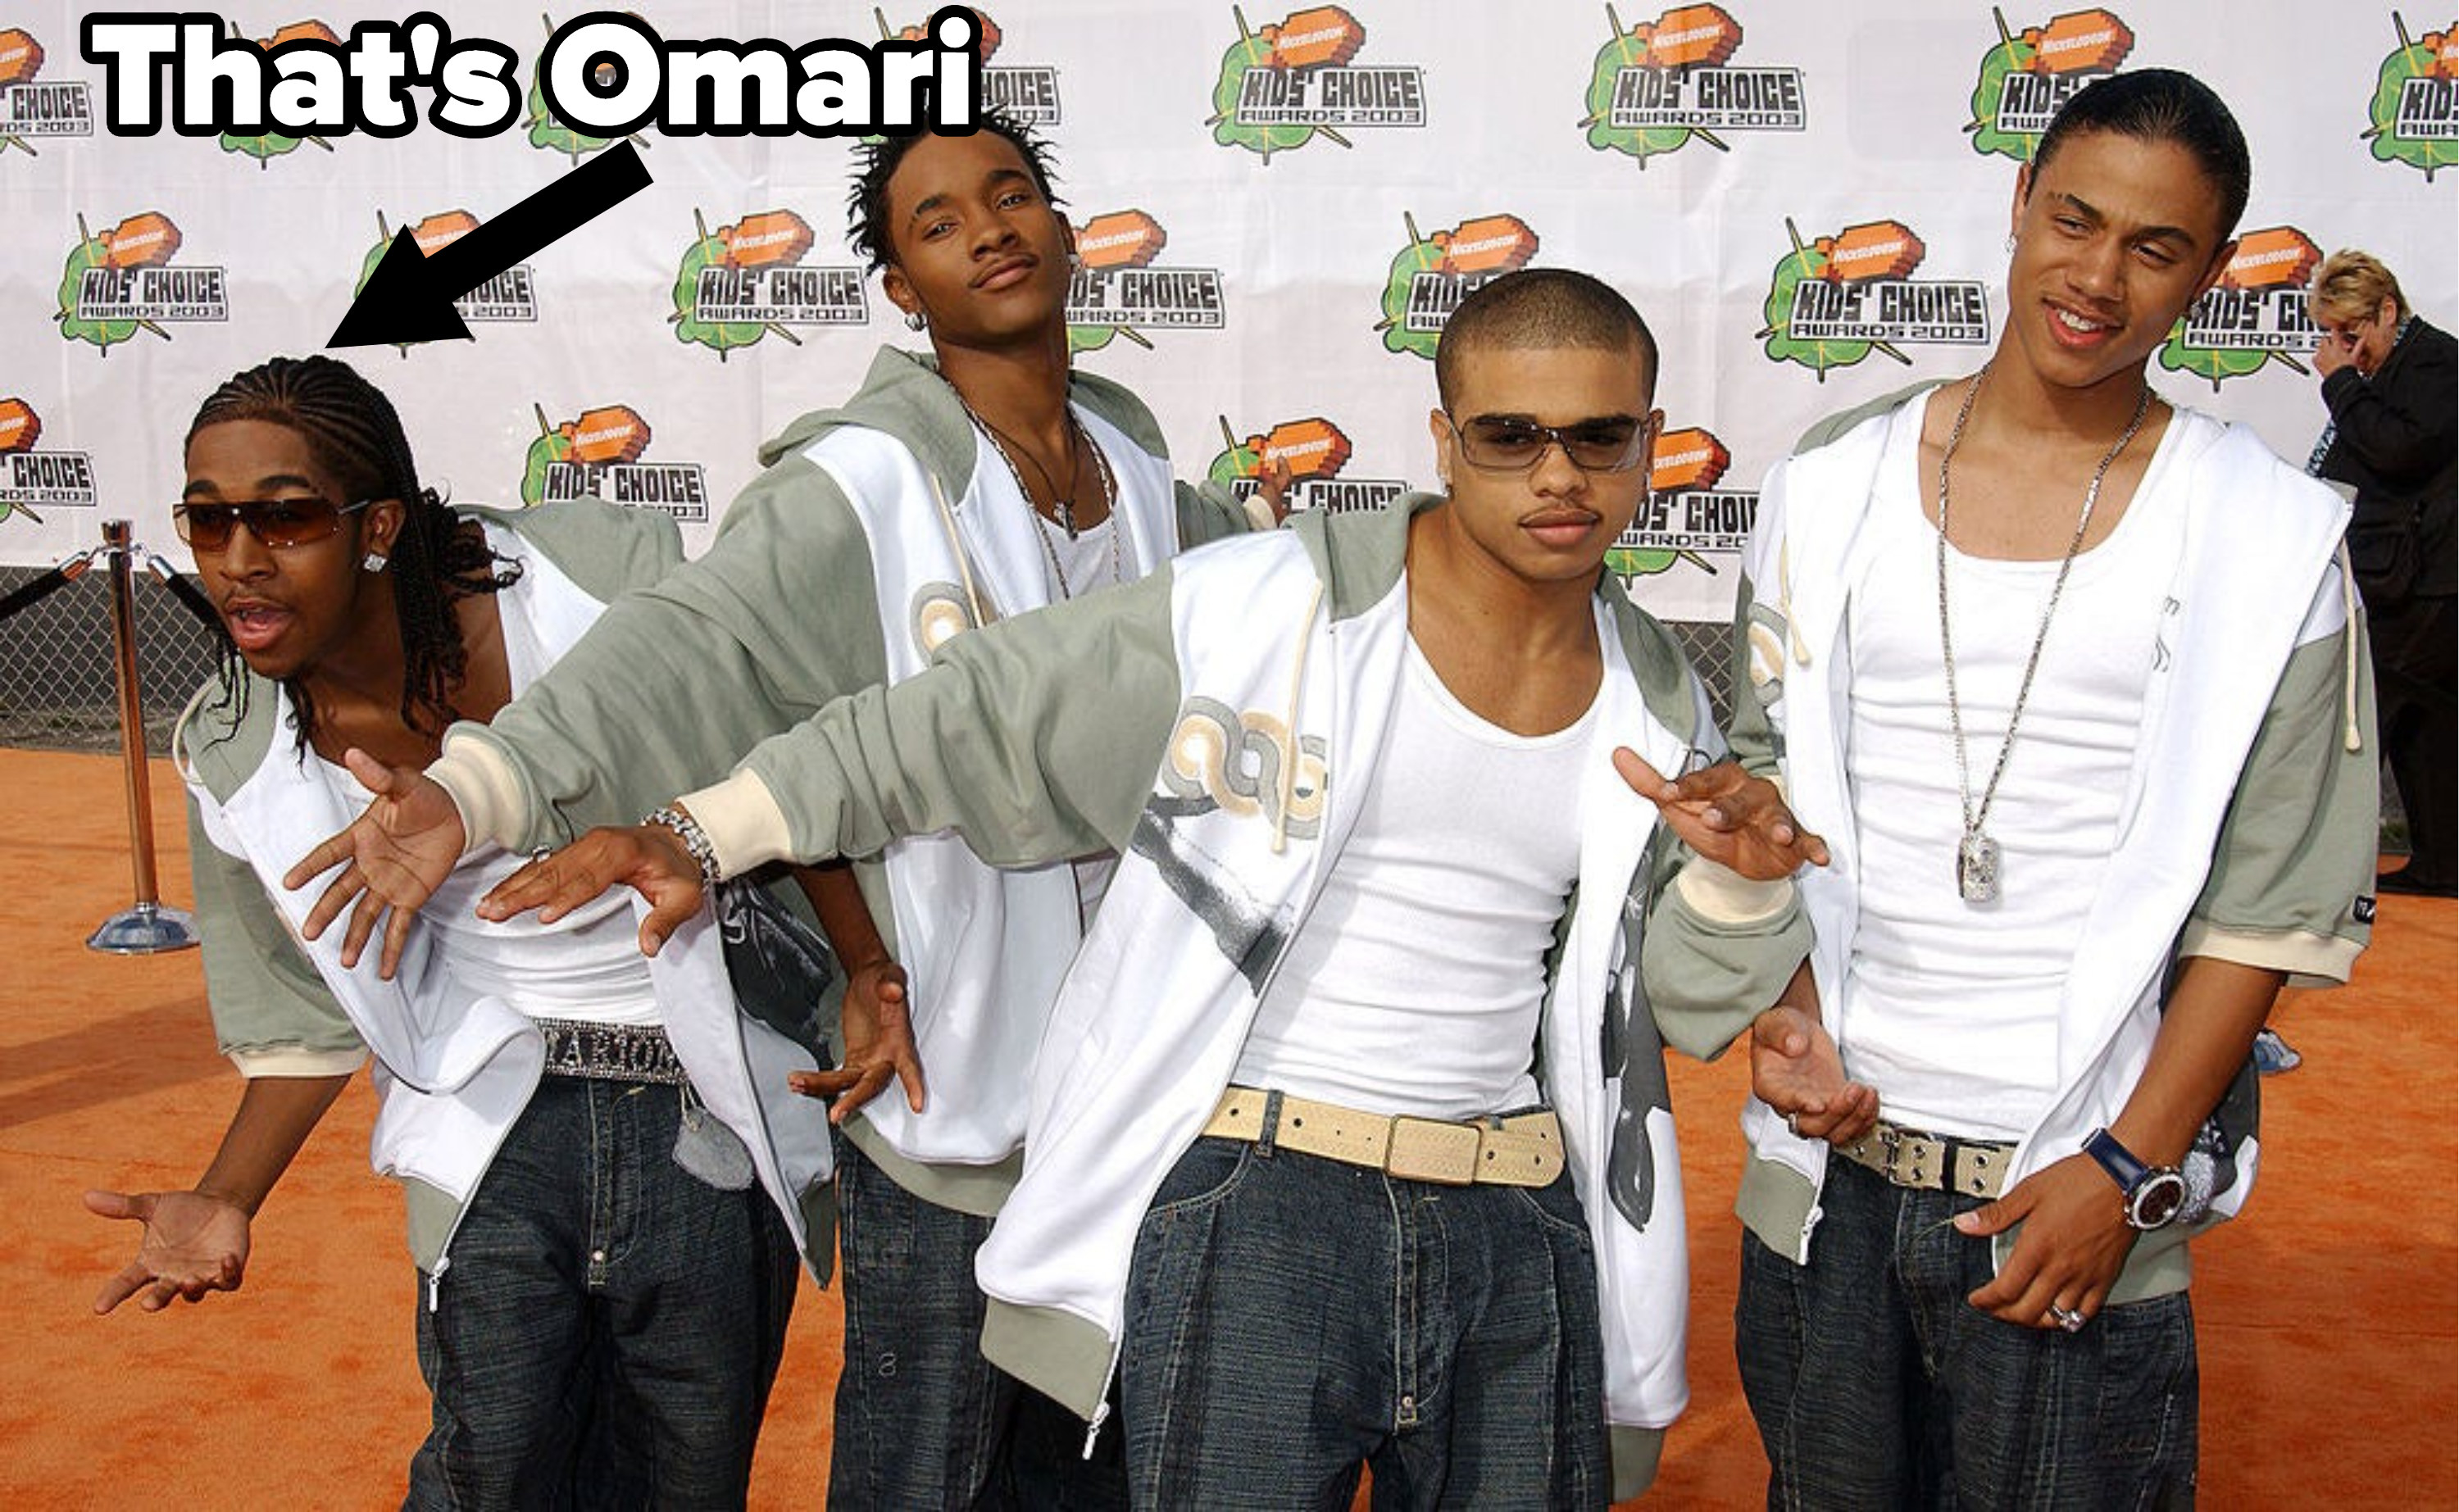 B2K doing funny poses on the orange carpet of the Nickolodeon Kids Choice Awards. The group members are wearing matching tanks, unzipped hoodies, and jeans